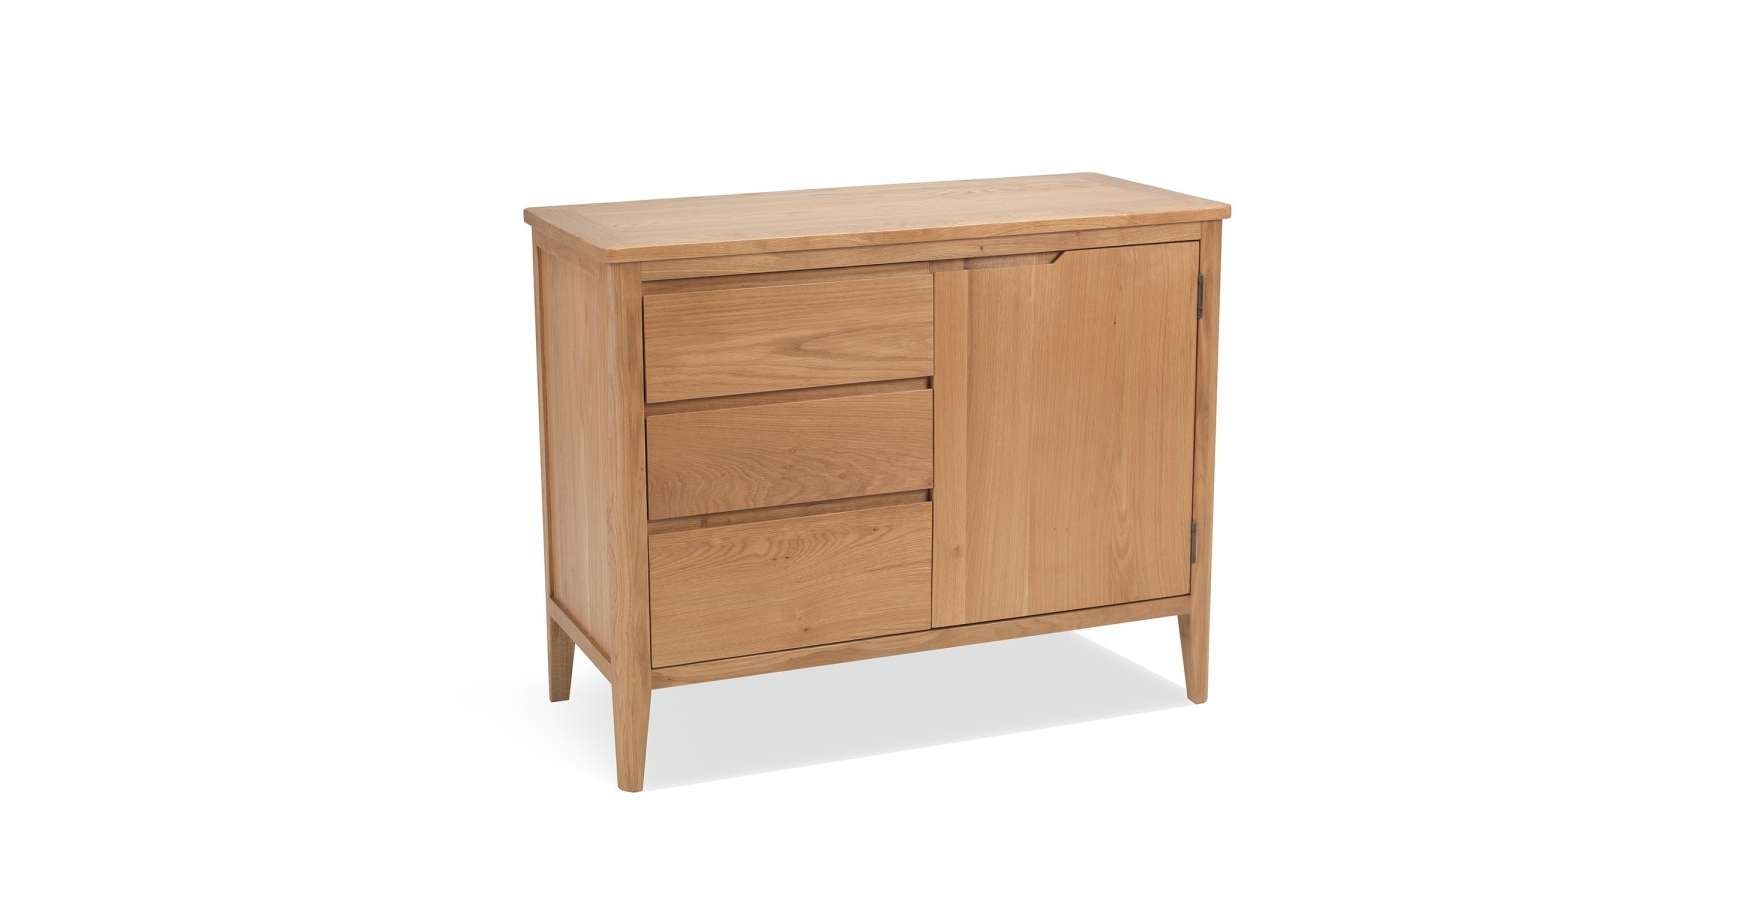 Cadley Oak Small Sideboard With Drawers – Lifestyle Furniture Uk Inside Small Sideboards (View 1 of 20)